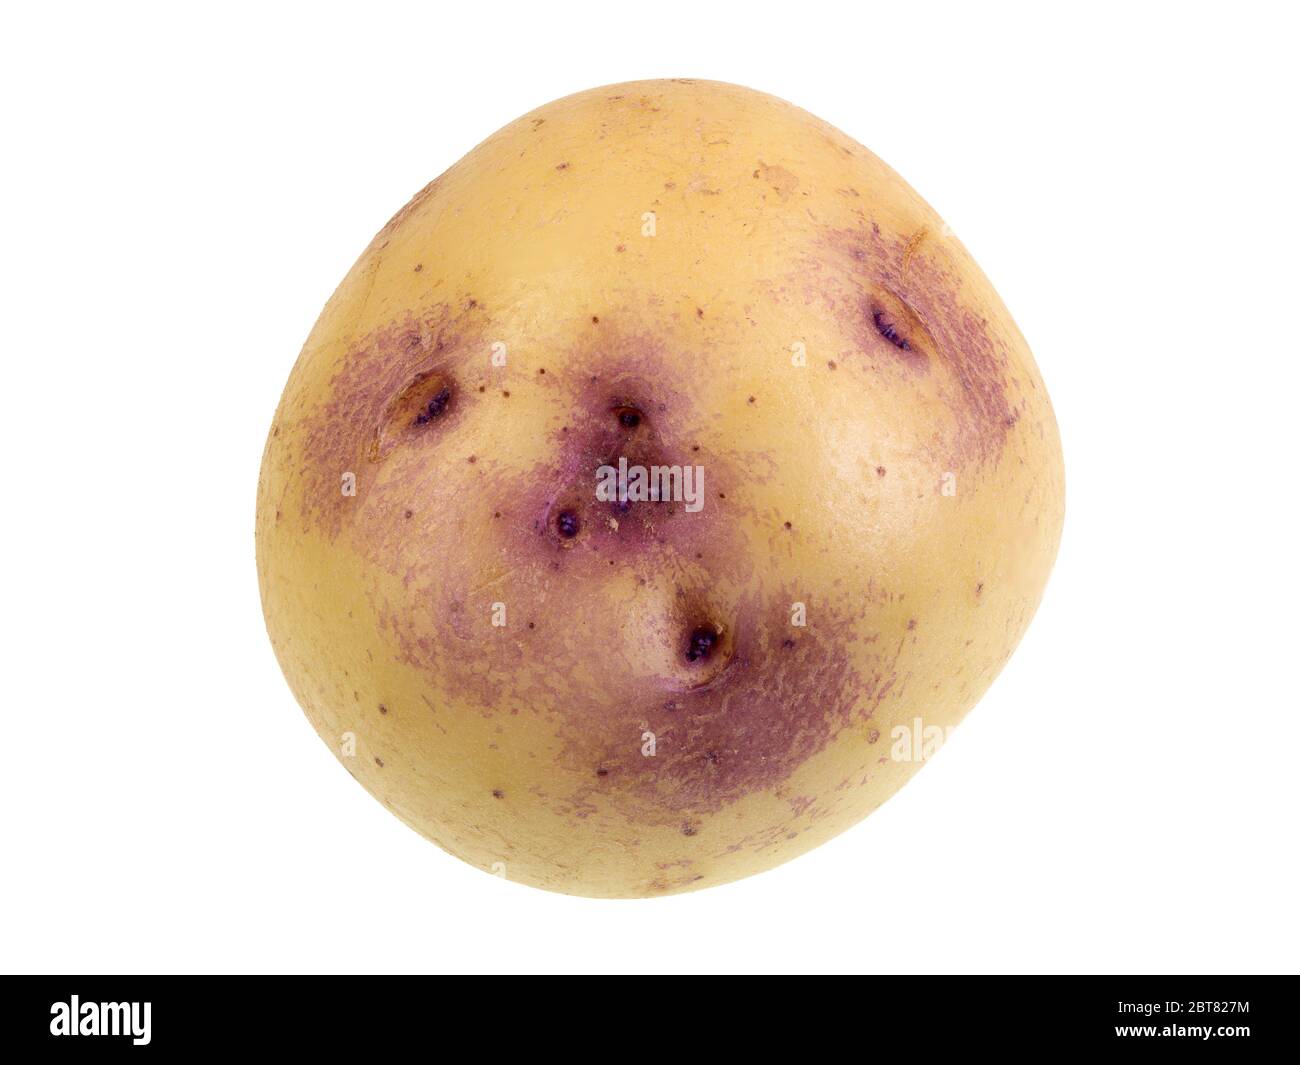 Modern variety of potato called Kestrel and known for their unique purple blush around the shallow eyes Stock Photo